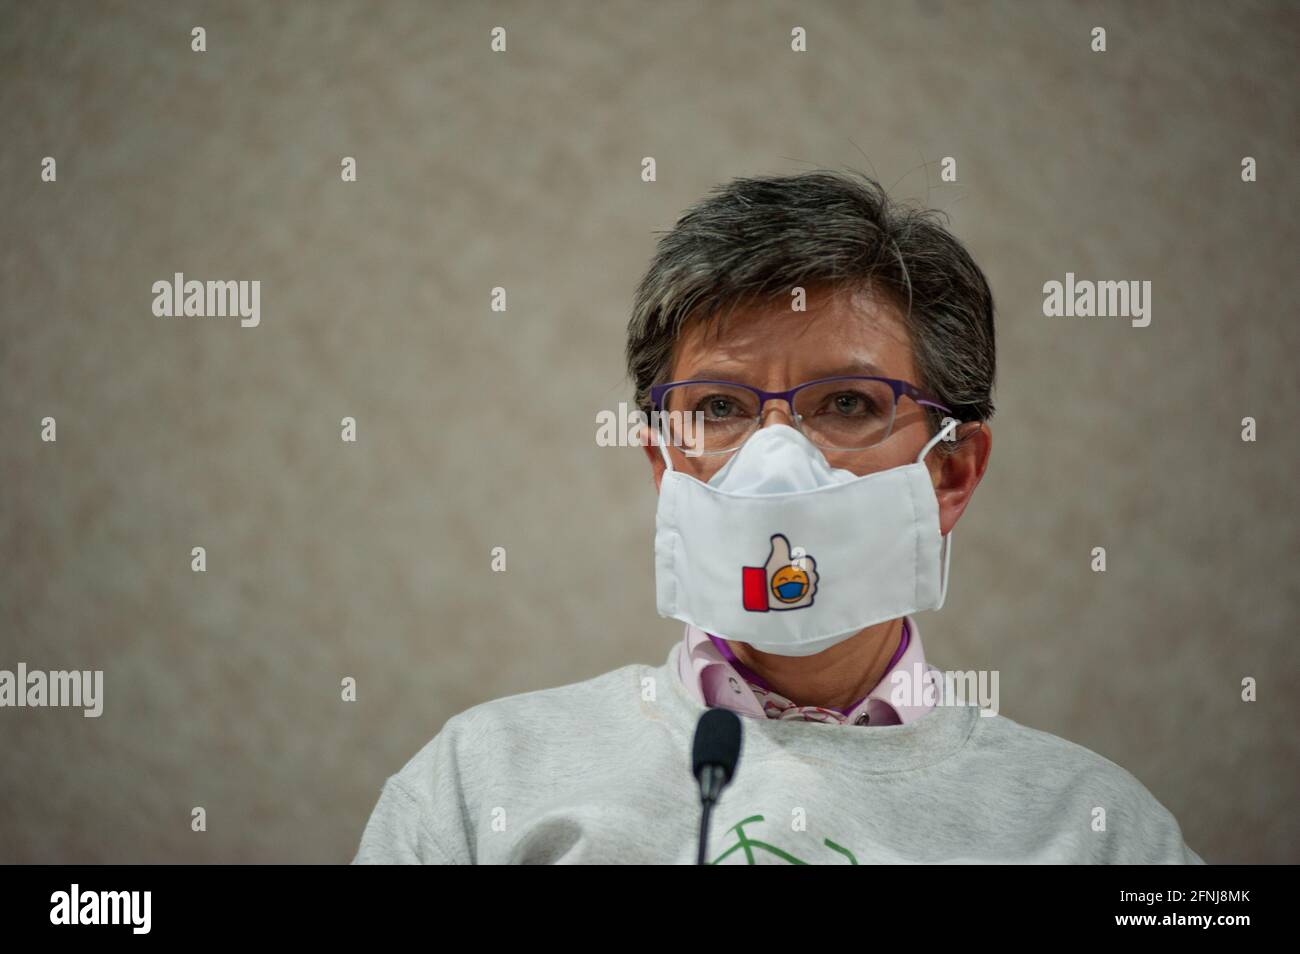 Former mayor of Bogota, Claudia Lopez wears a face mask to prevent the spread of the novel coronavirus, during a press conference for the international media about the status of the death of Javier Ordonez (Javier Ordoñez) caused by a case of police brutality. In Bogota, Colombia on October 2 2020 Stock Photo